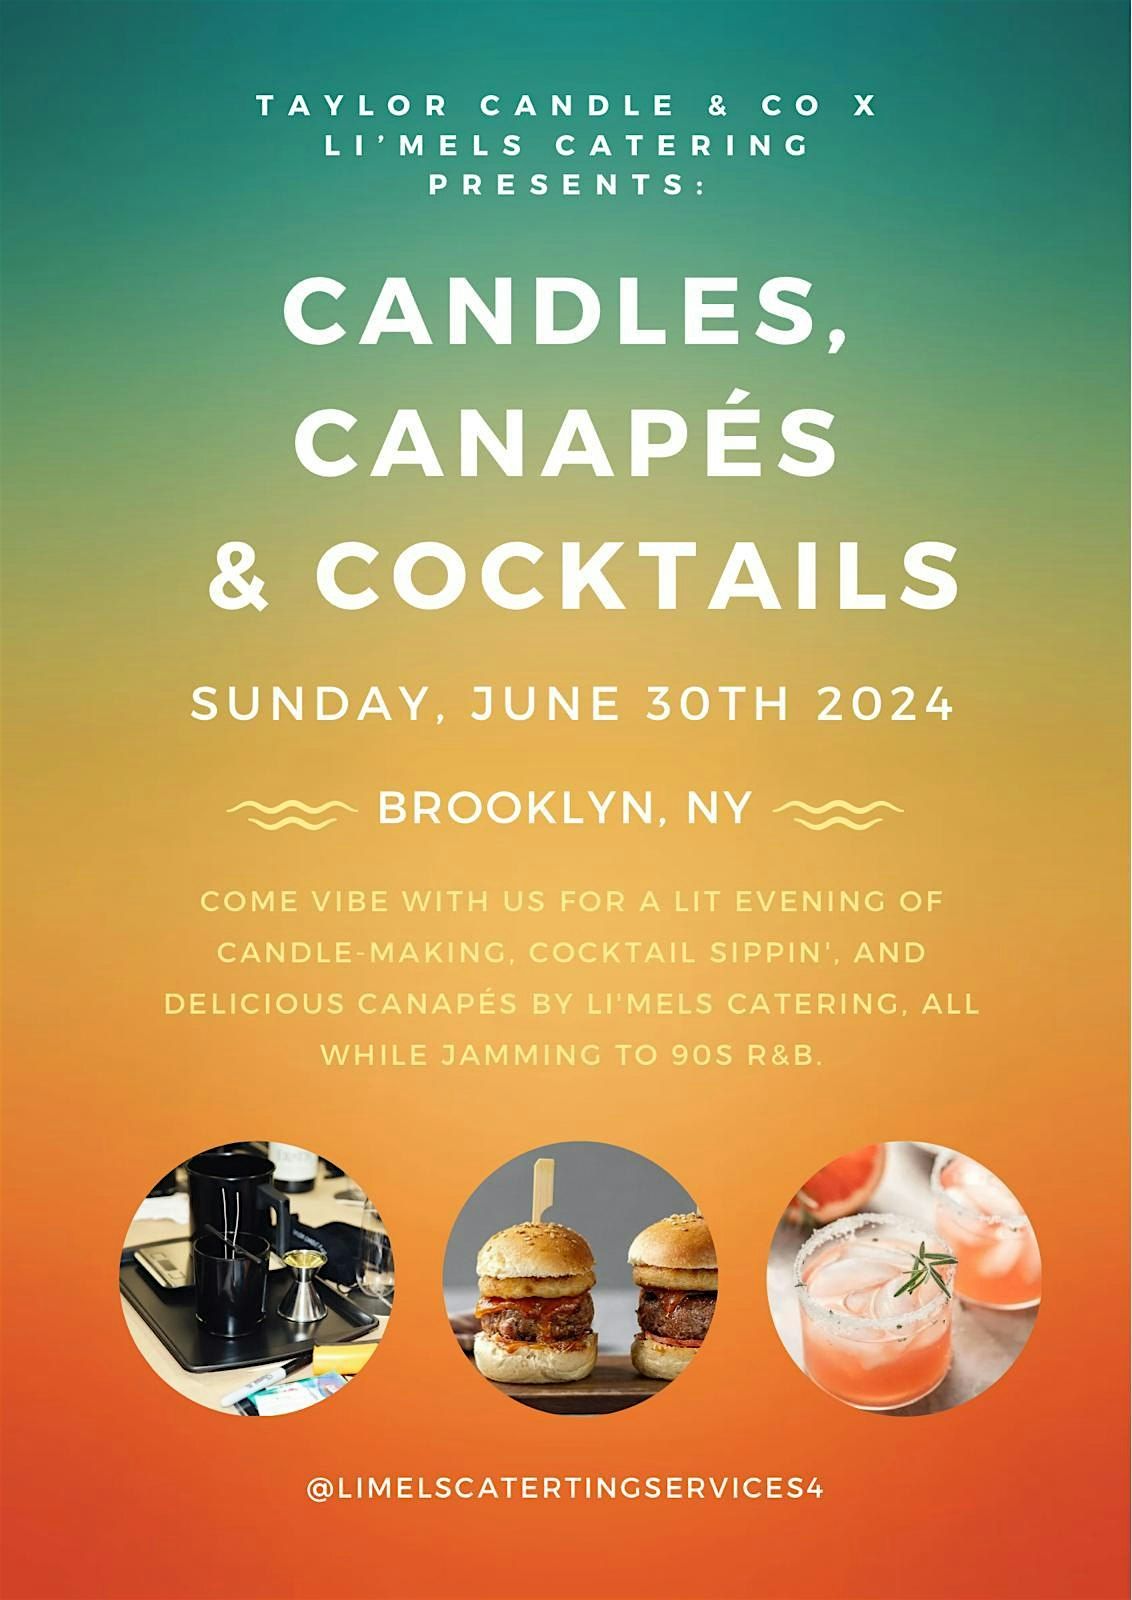 Candles, Canapes & Cocktails